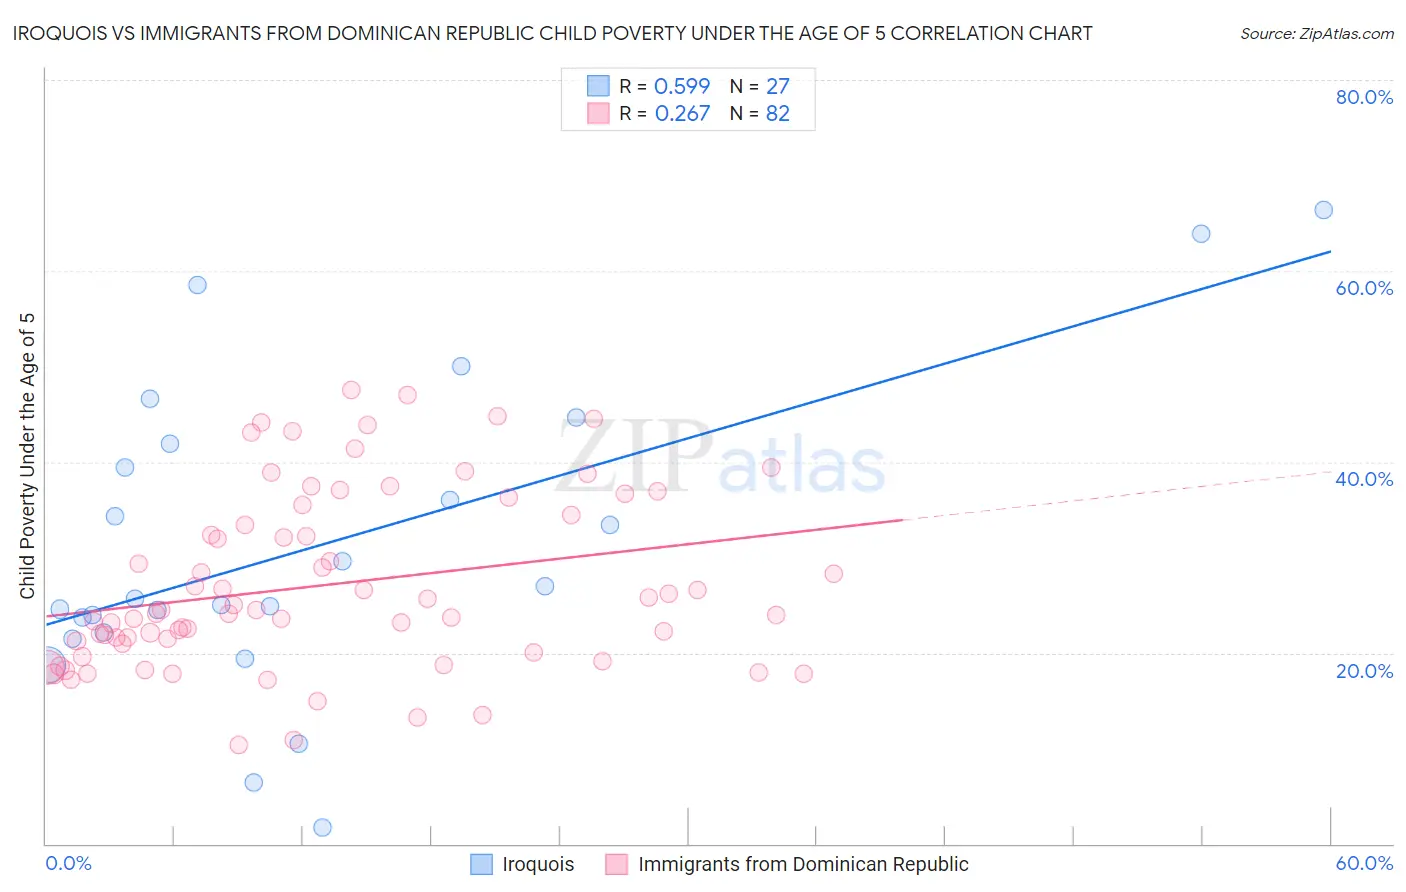 Iroquois vs Immigrants from Dominican Republic Child Poverty Under the Age of 5